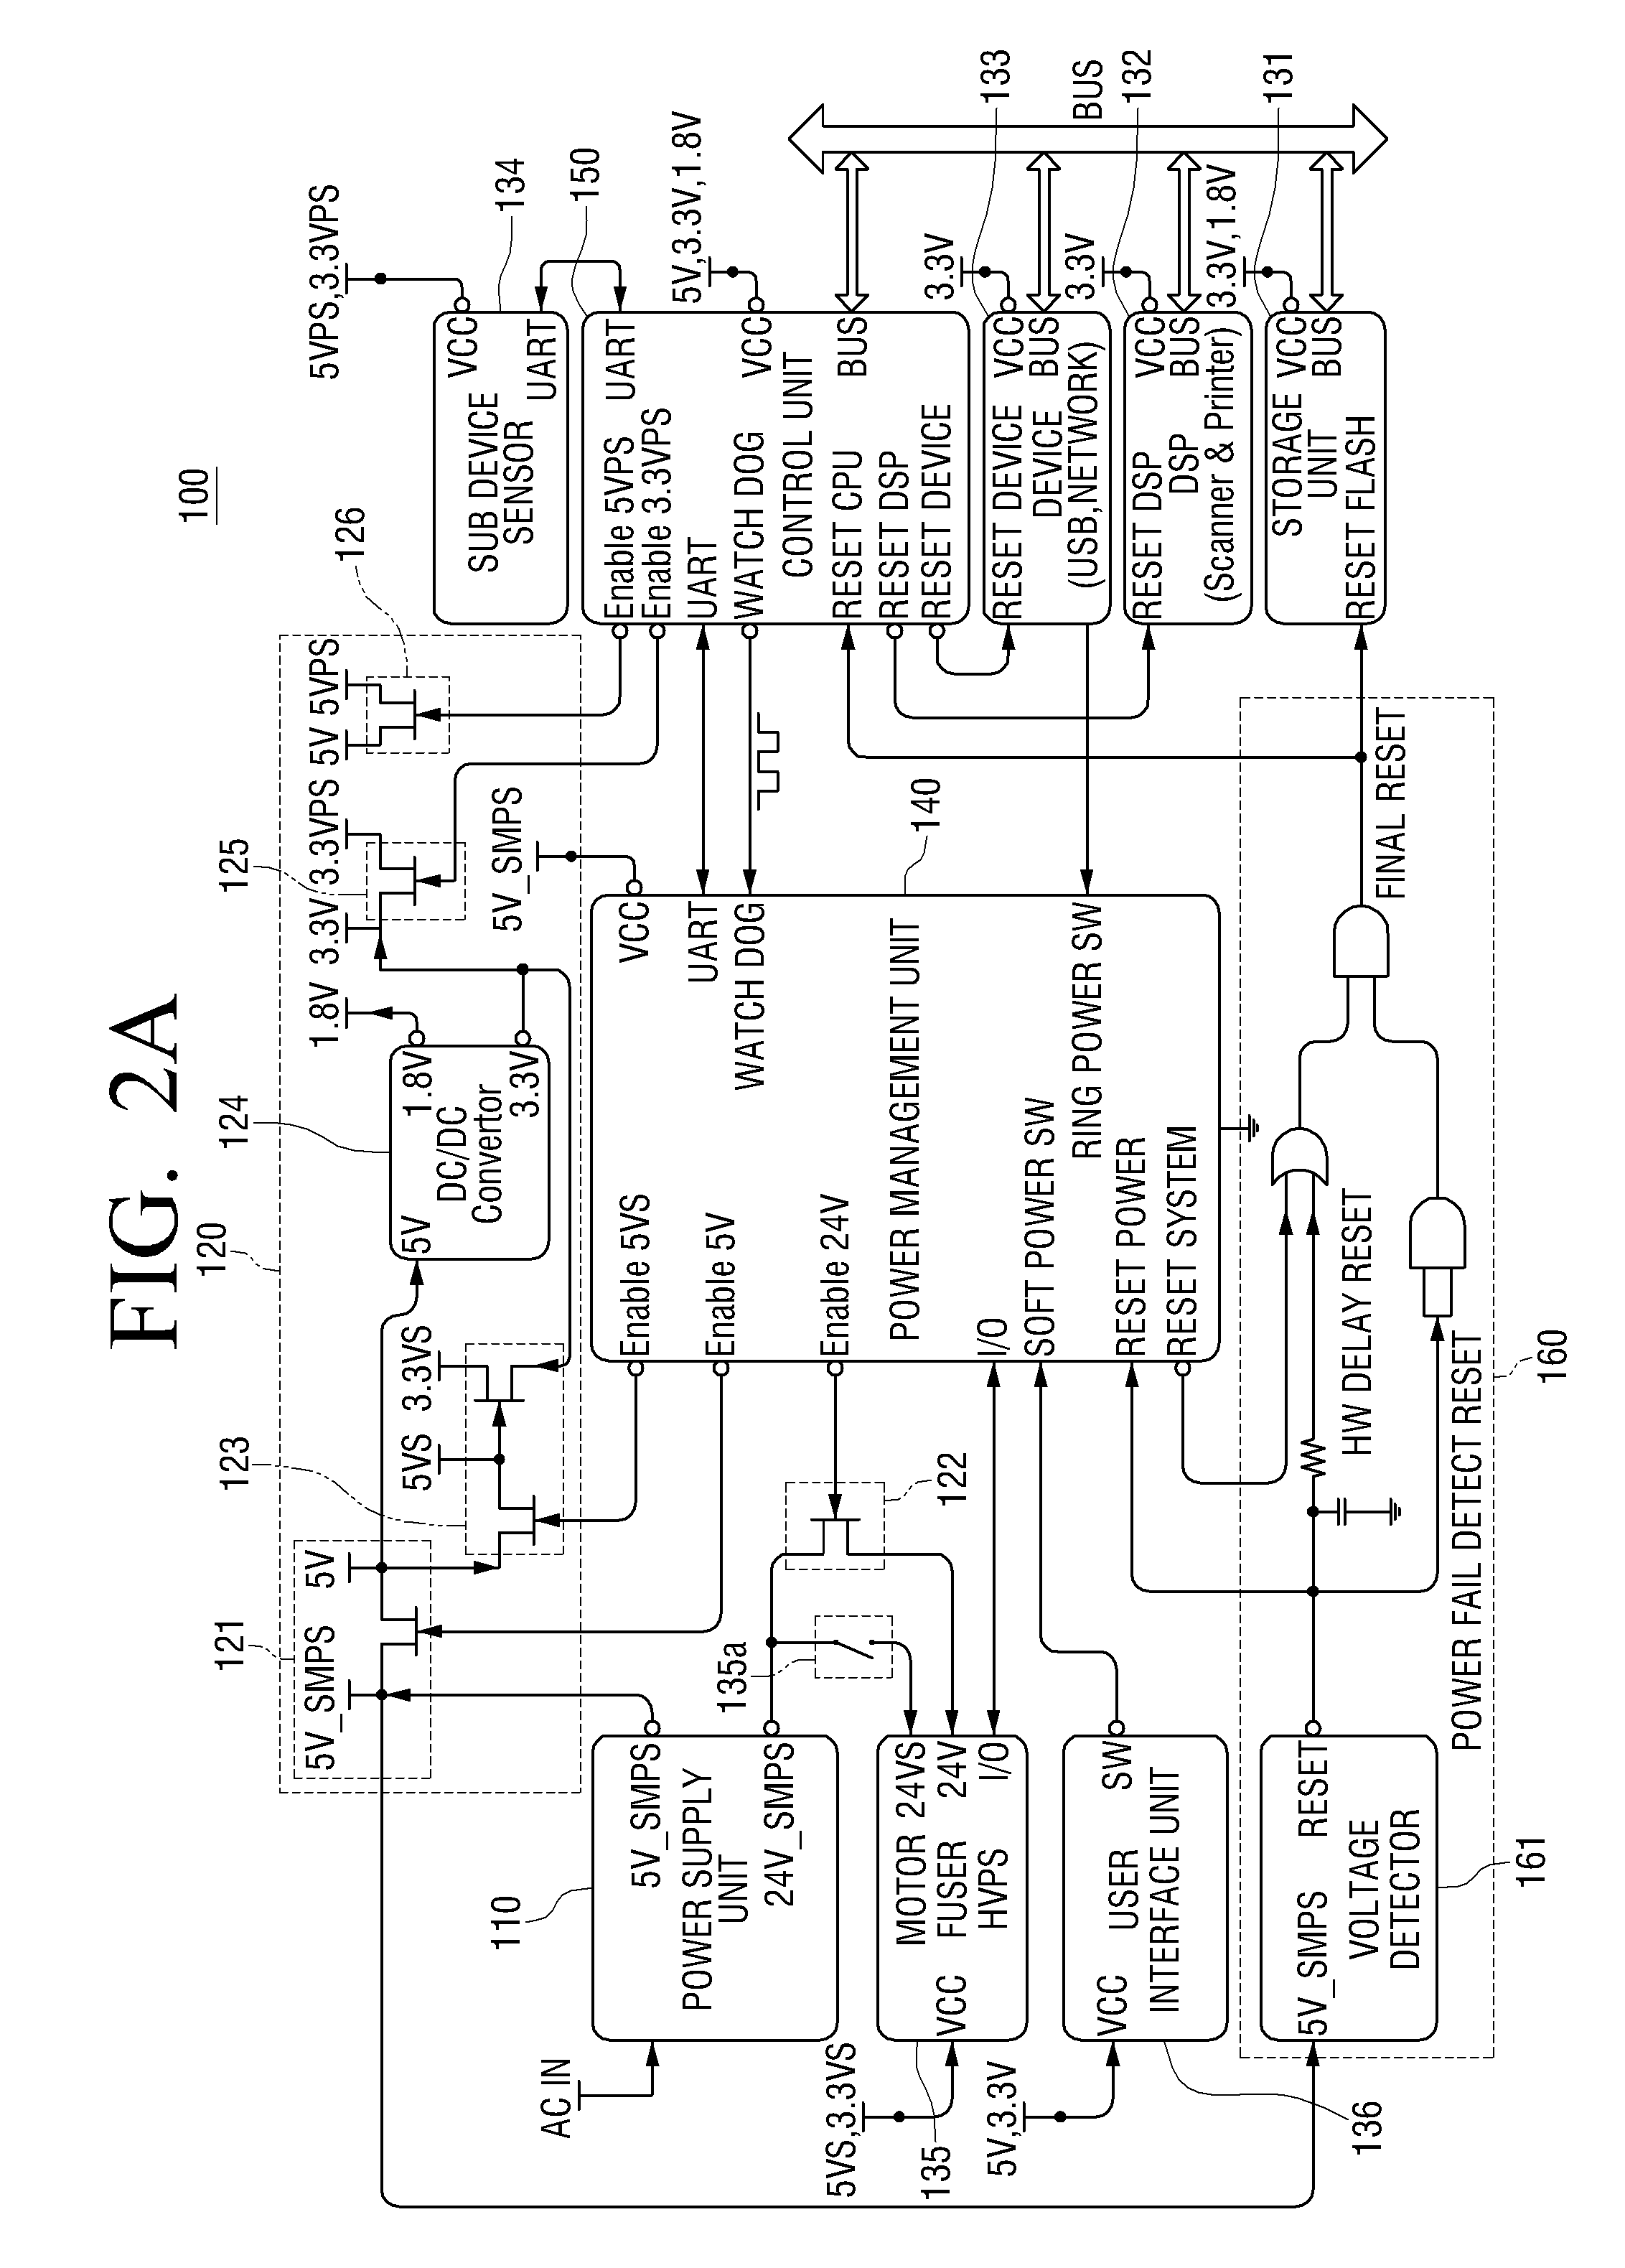 Image forming apparatus and method of controlling power thereof